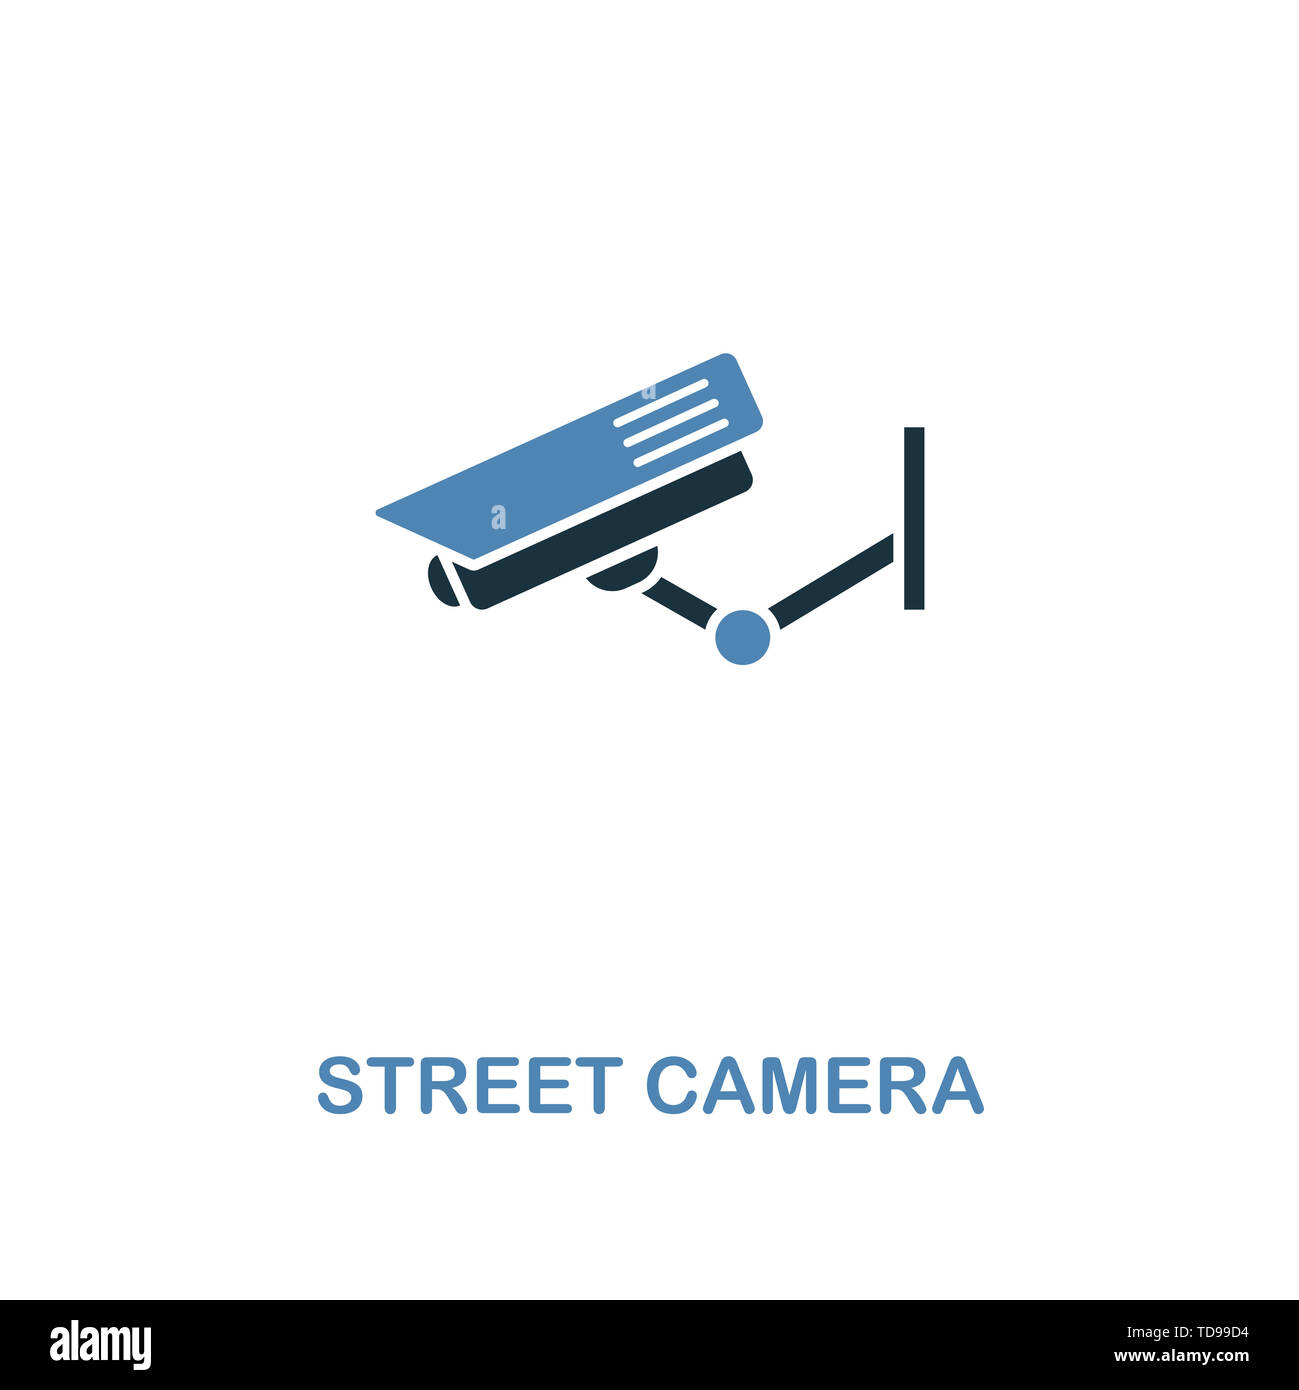 Street Camera icon in two colors. Creative design from city elements icons collection. Colored street camera icon for web and mobile design Stock Photo